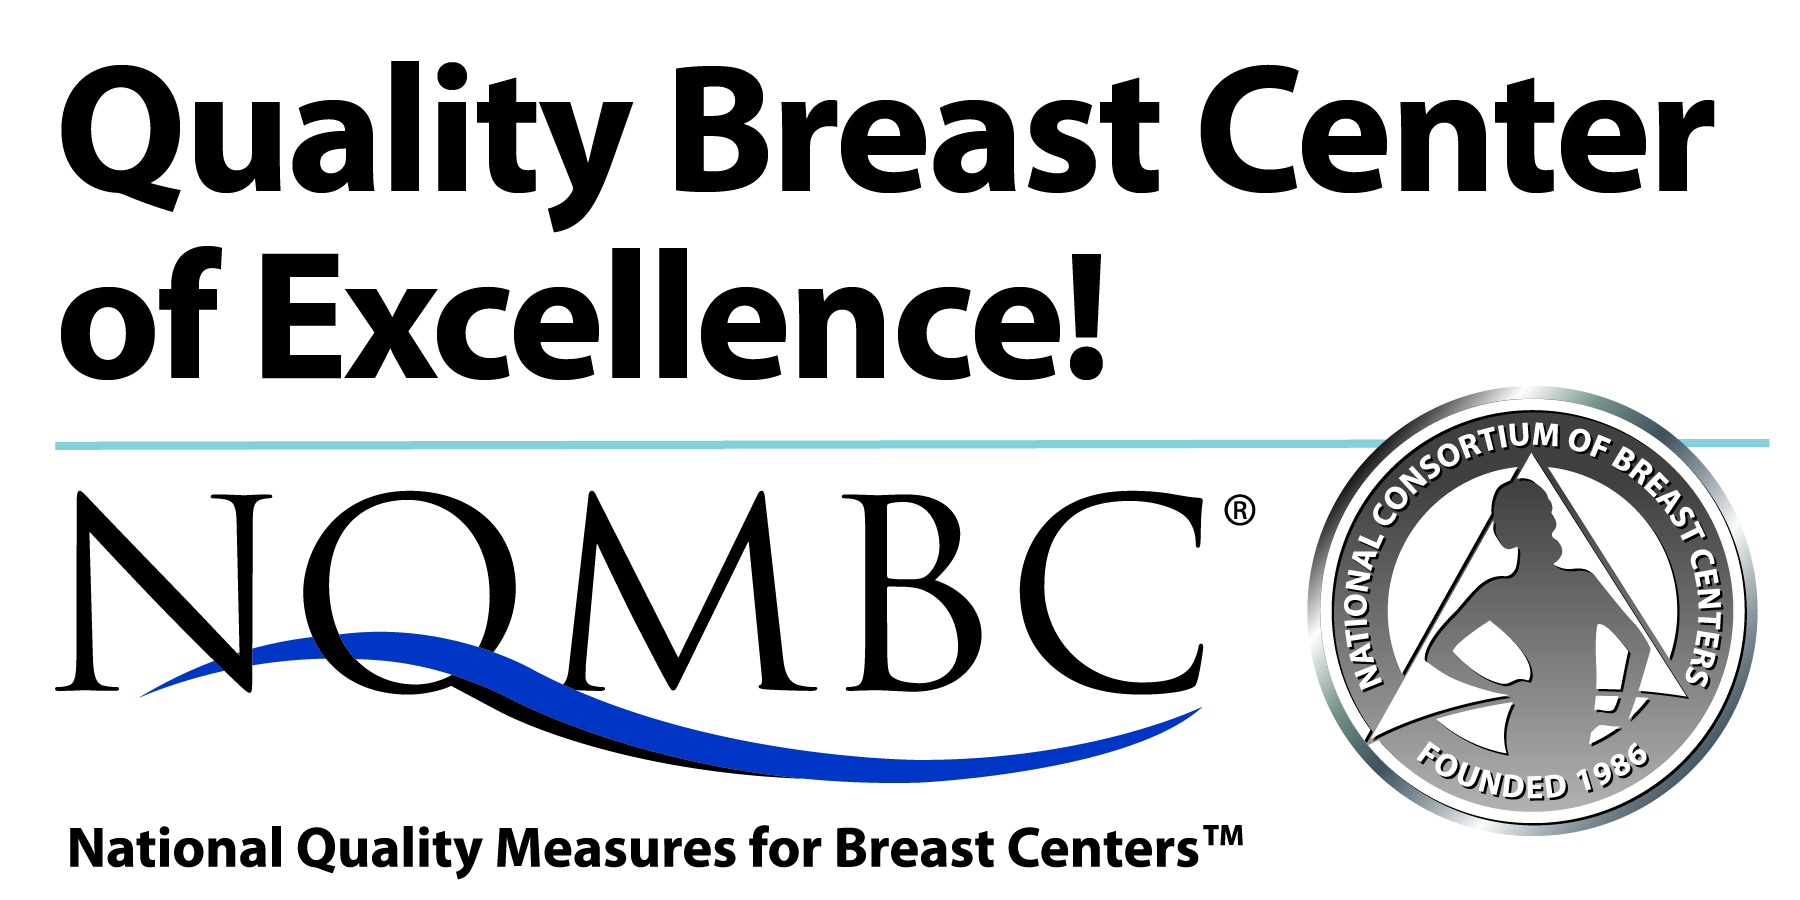 quality breast center of excellence